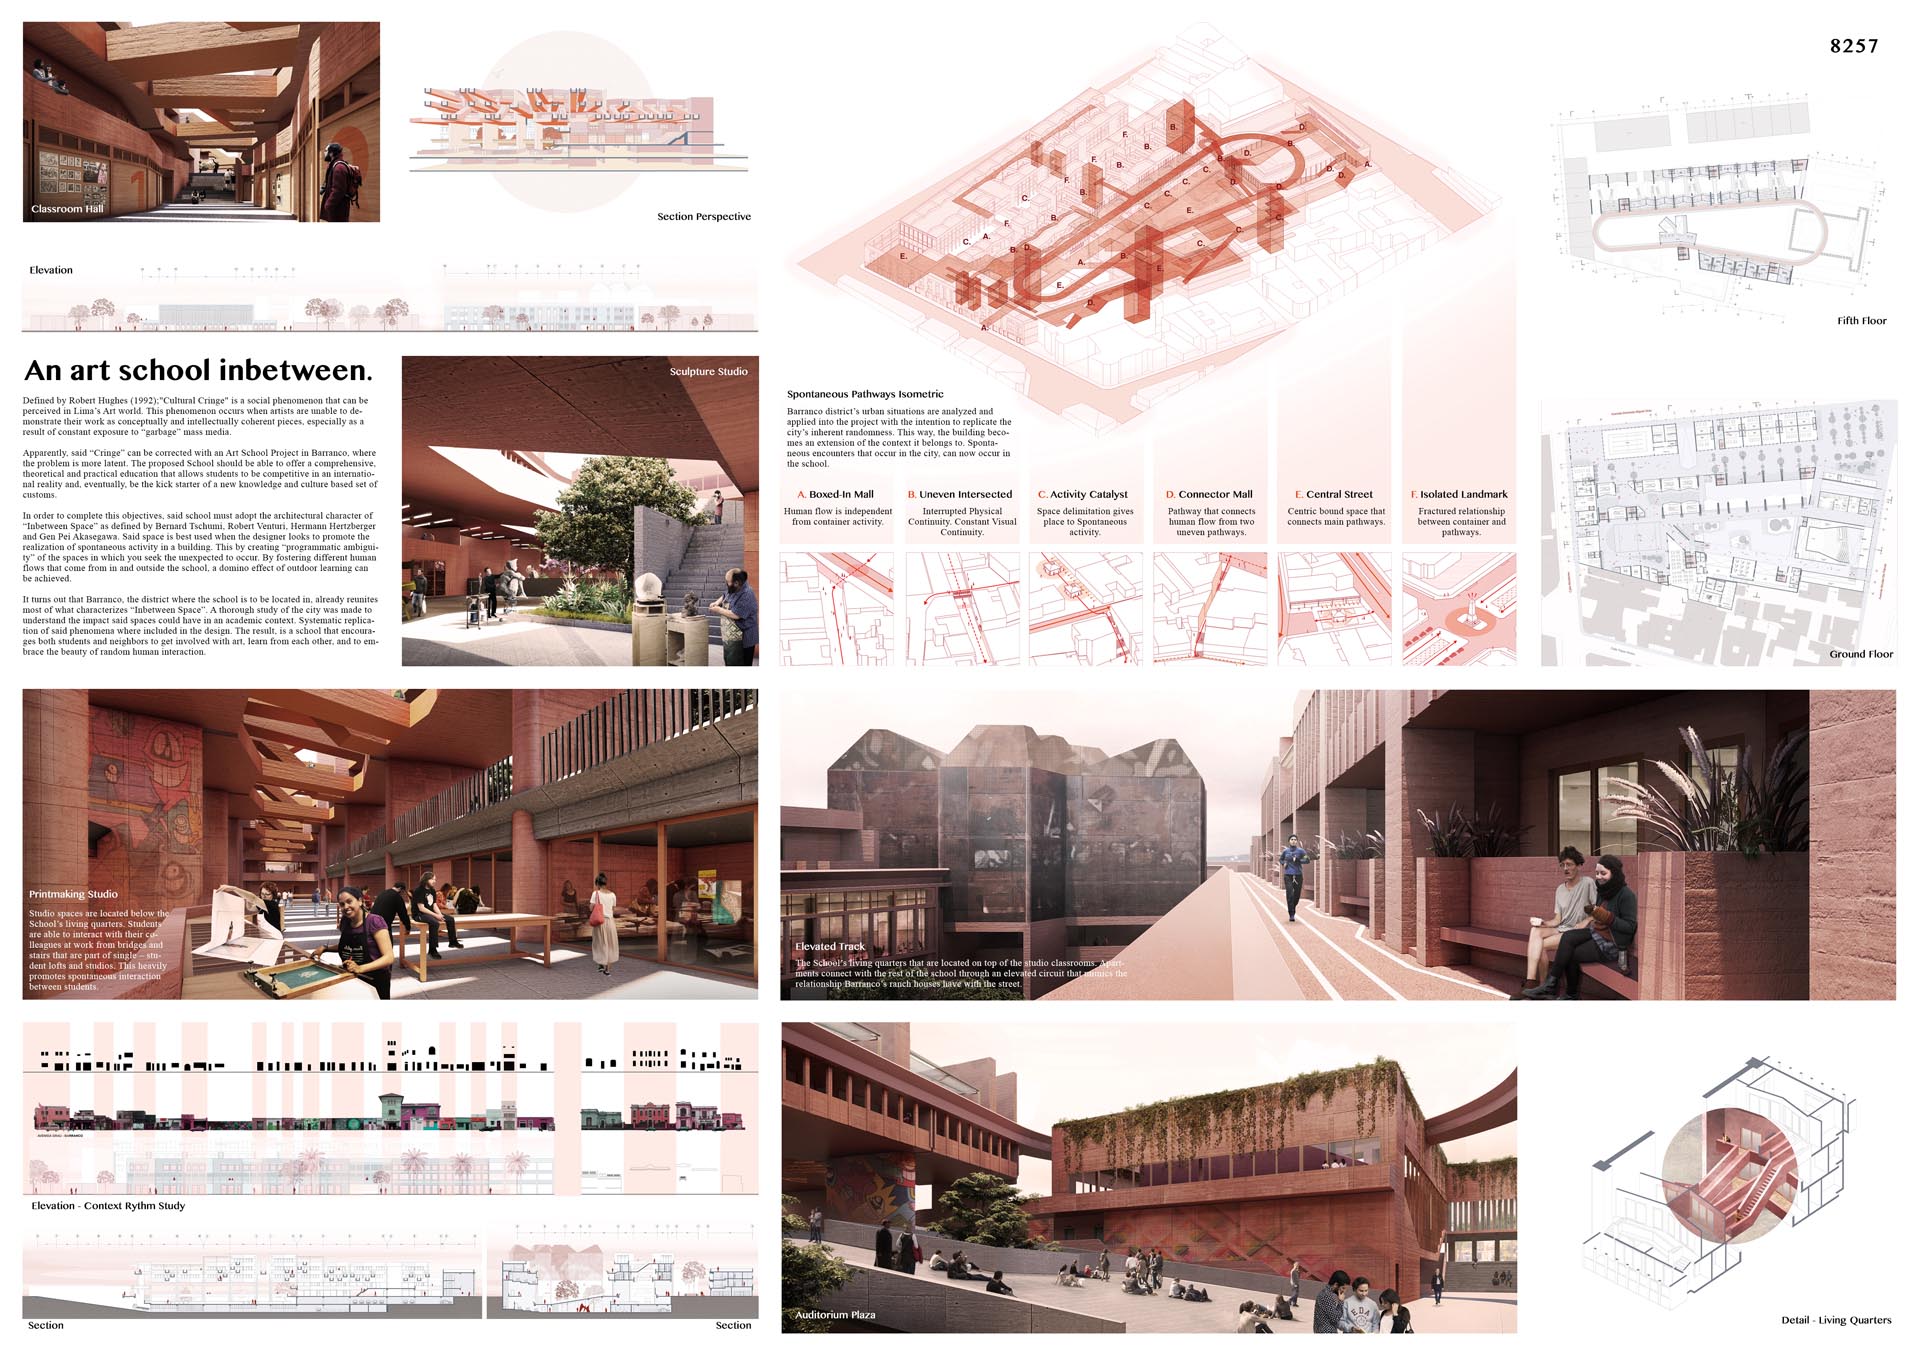 Second Prize Winner - Architecture Thesis of the Year 2021